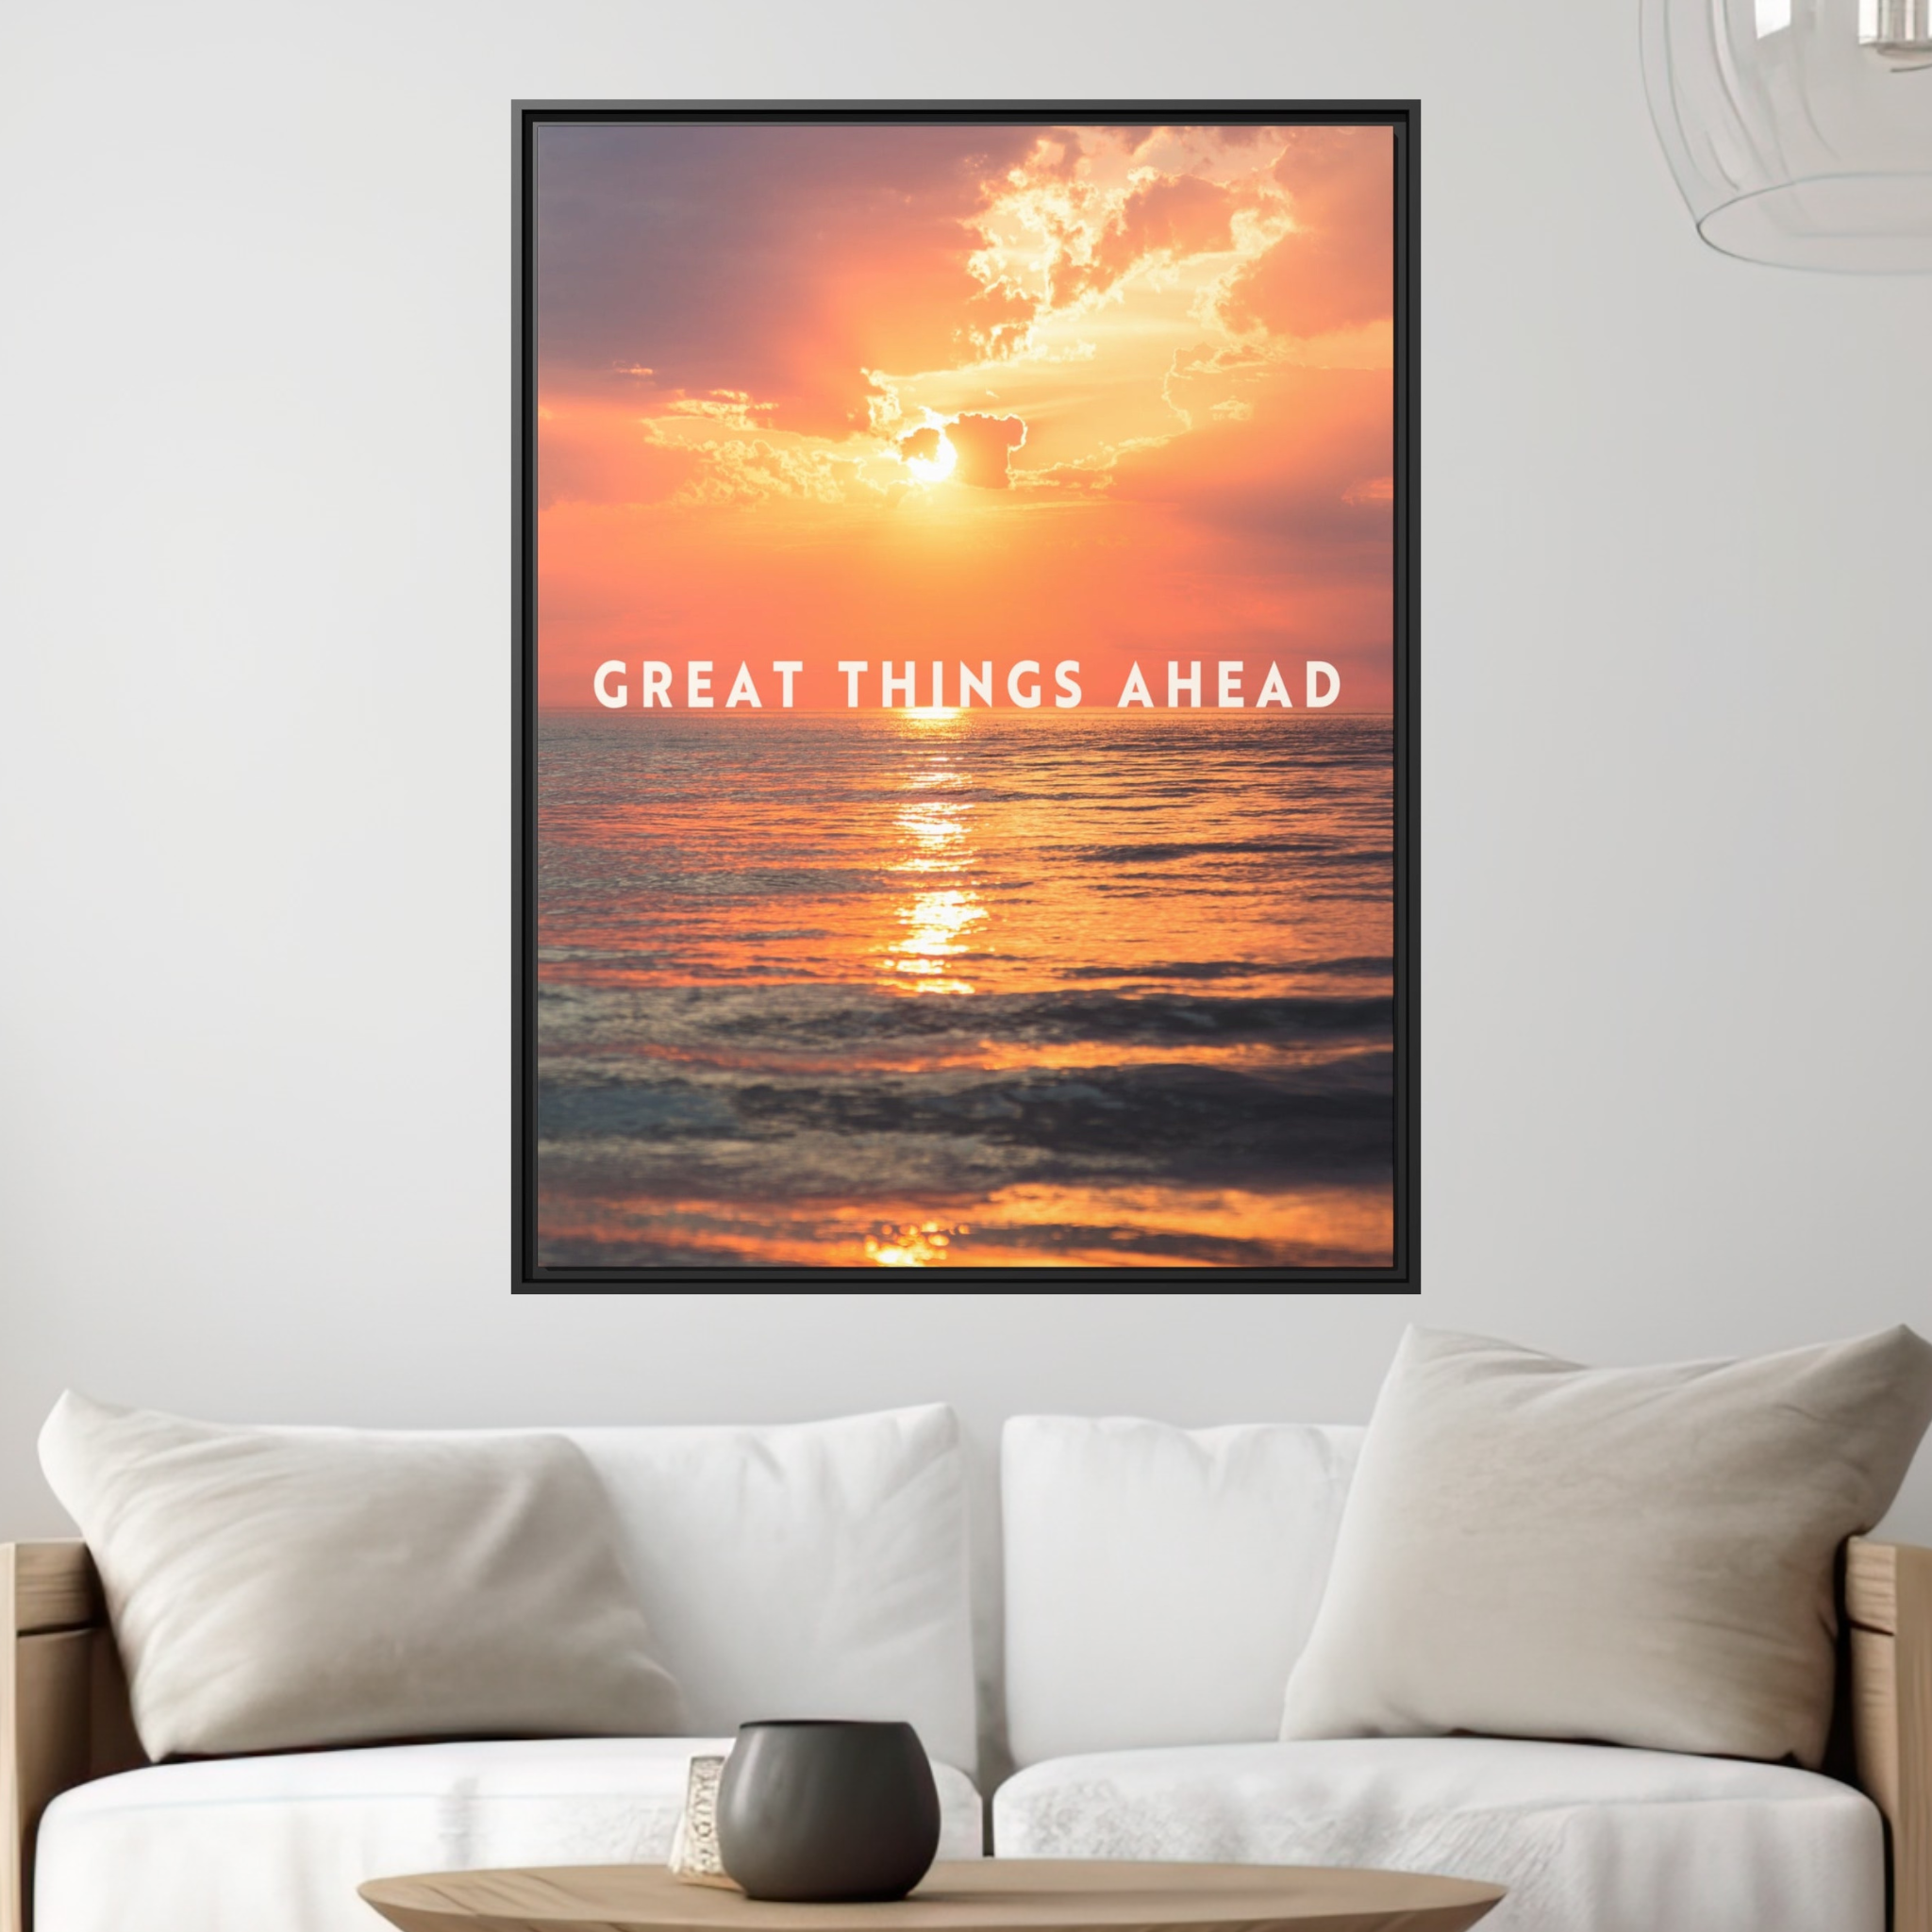 Great Things Ahead - Sunrise - Wall Art additional image 1